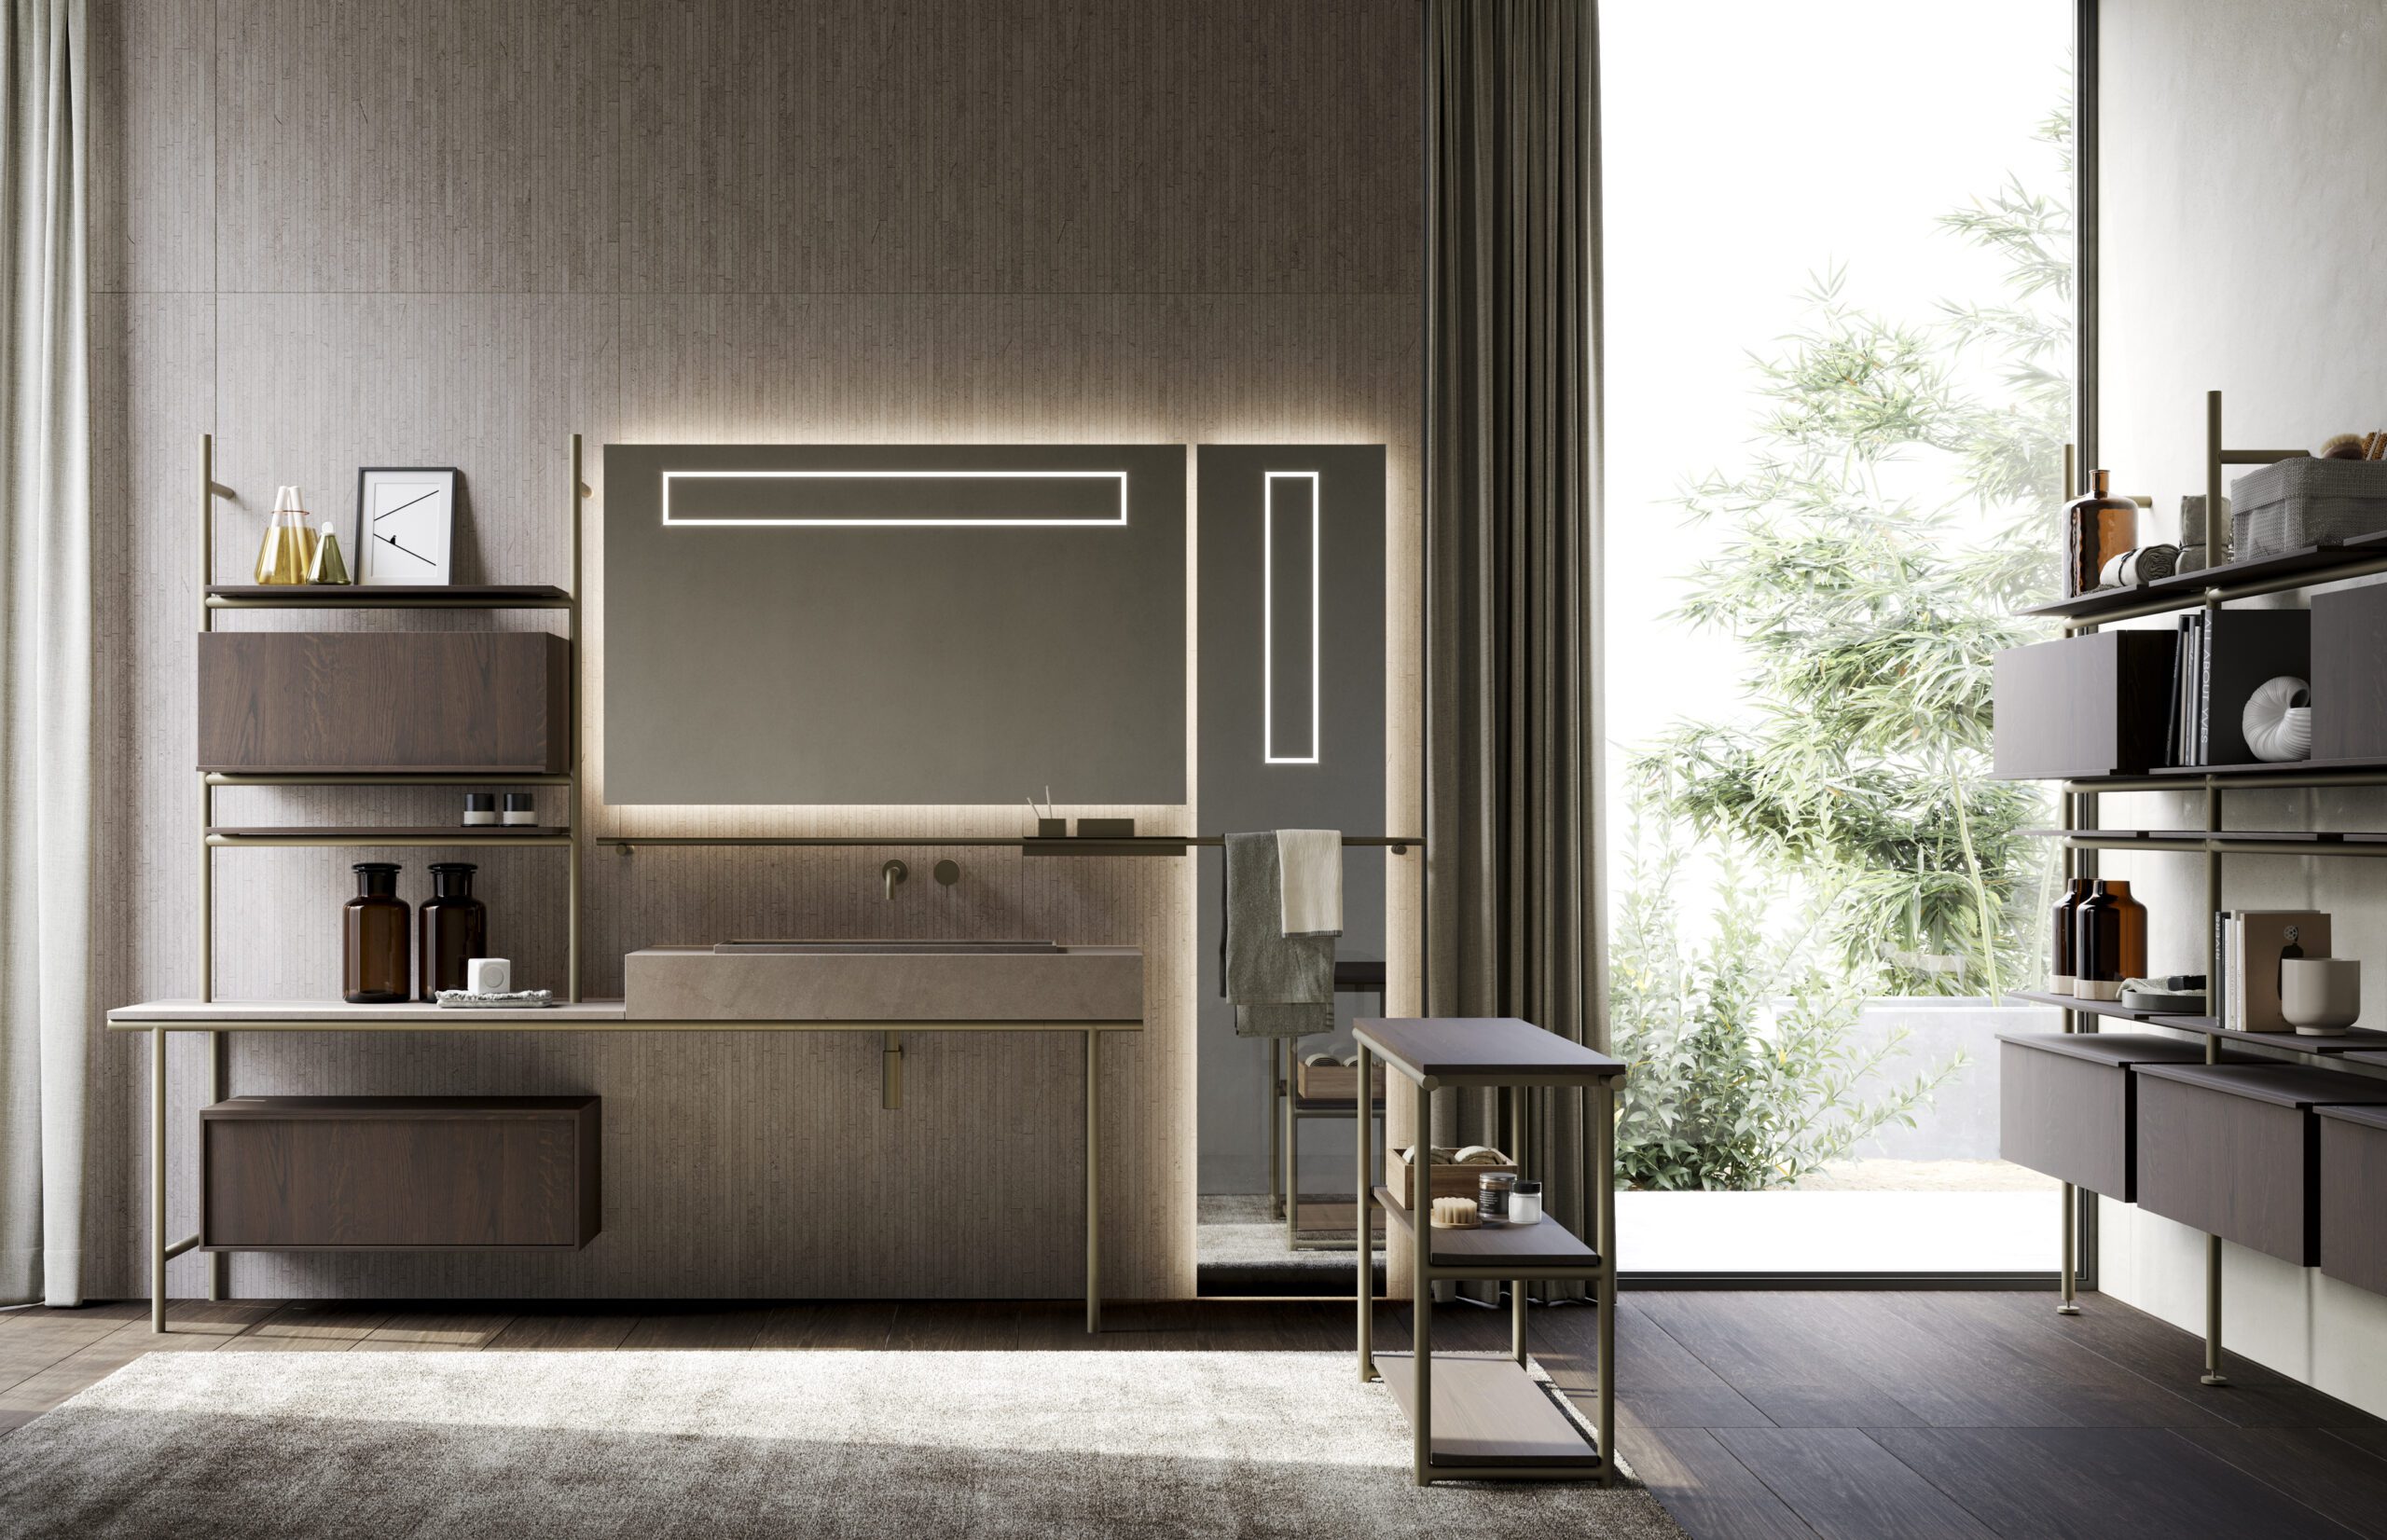 Luxury bathroom showing the versatility of the Sartus design elements, including the metal bar, which can be used as a base to create different functional pieces – from wall storage to freestanding units and accessorized bars.